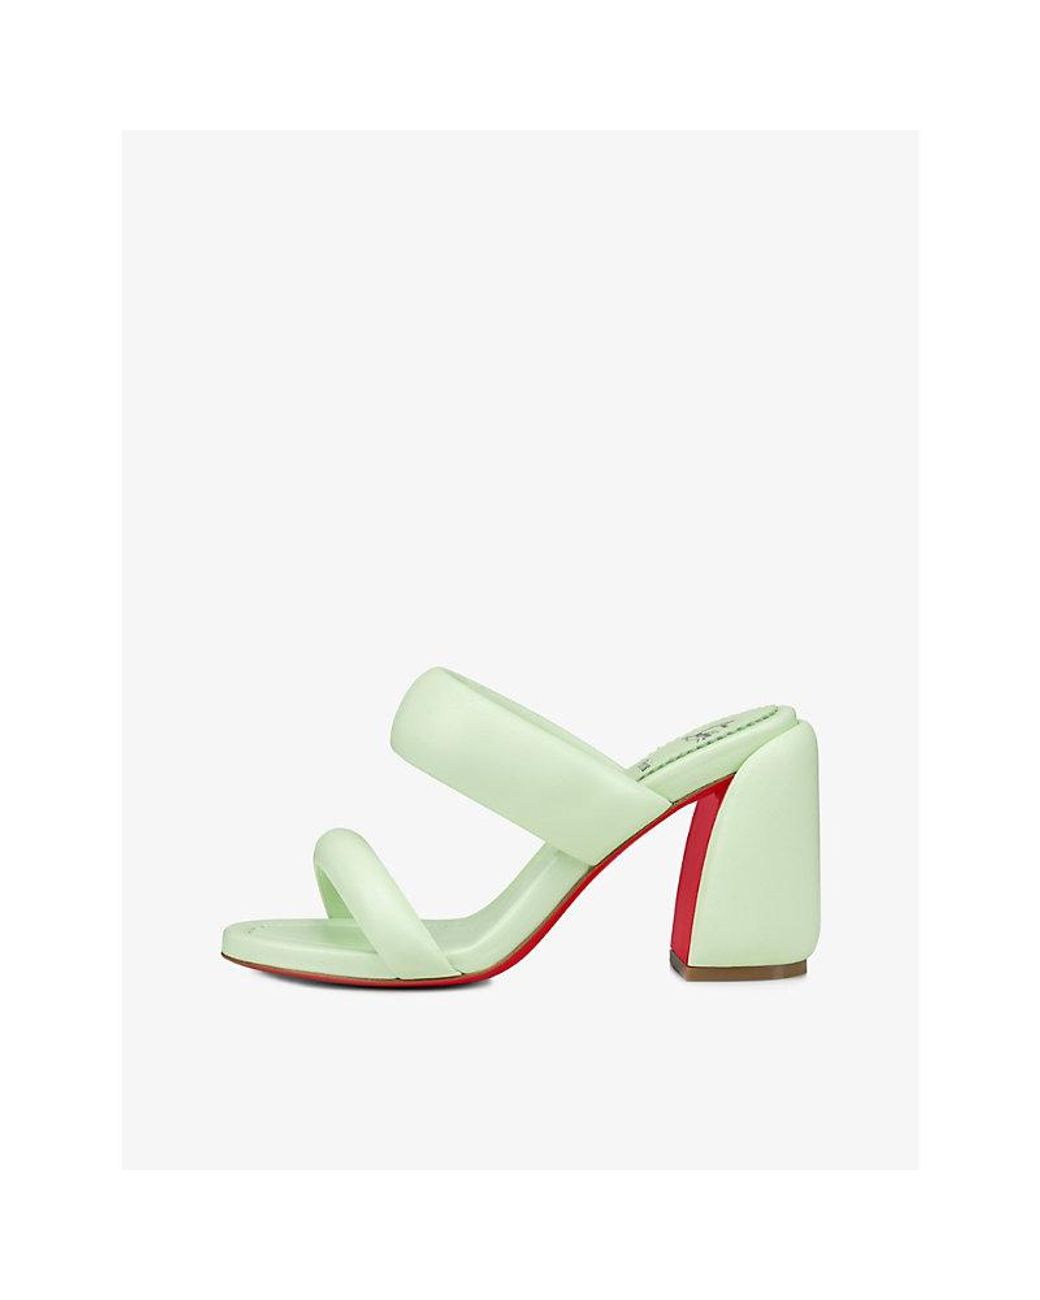 Christian Louboutin Inflama Sab 85 Leather Heeled Sandals in Green